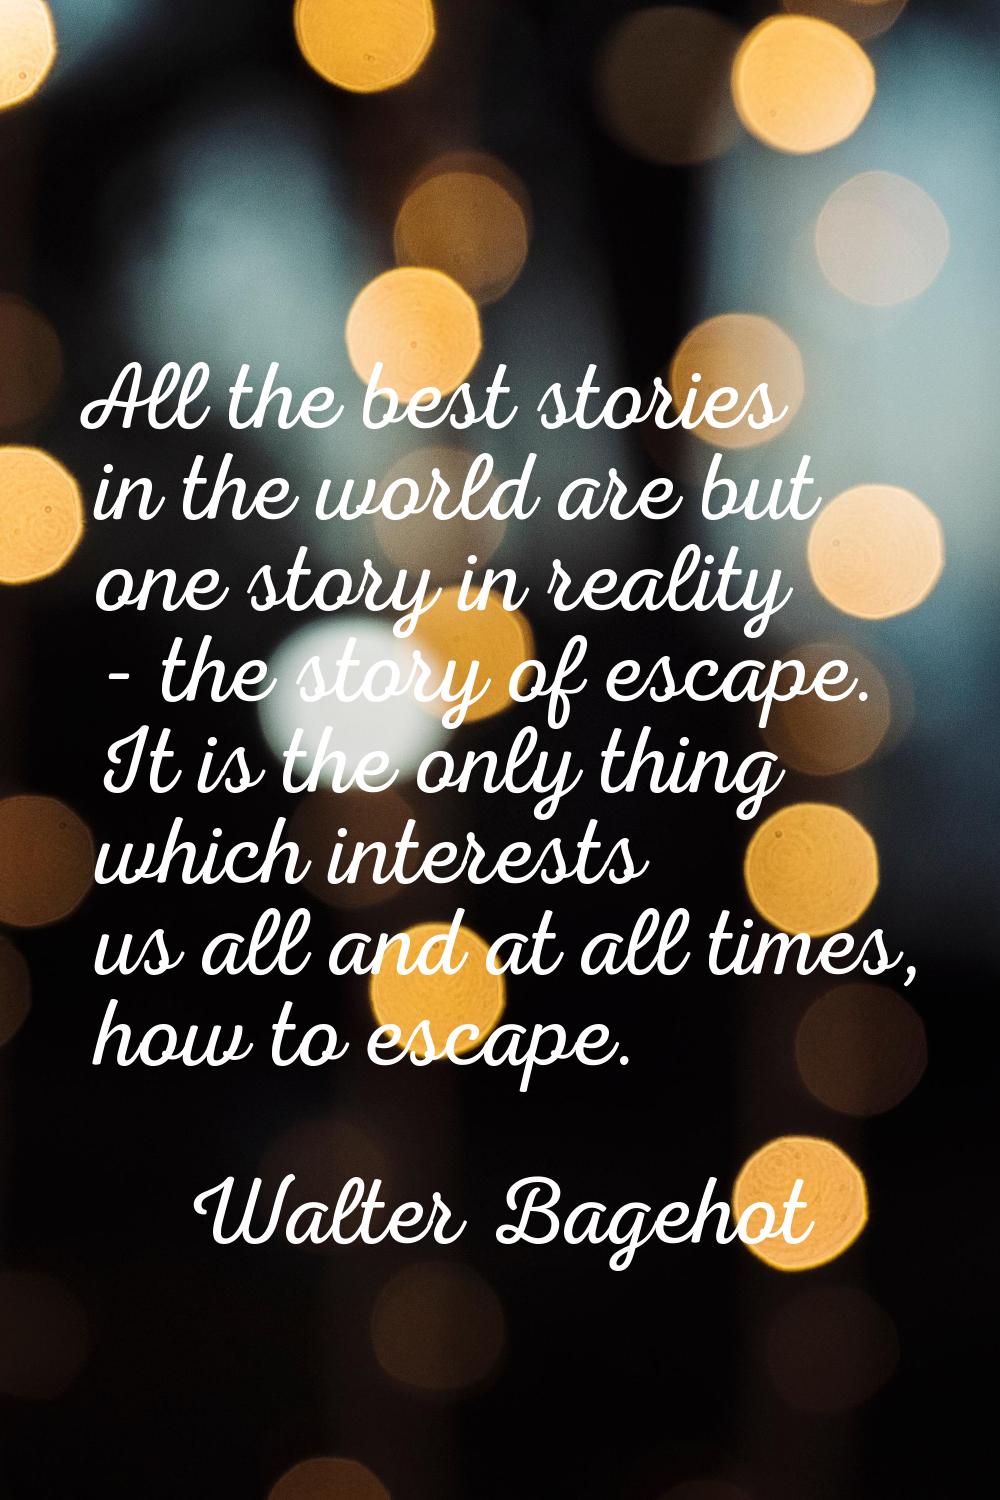 All the best stories in the world are but one story in reality - the story of escape. It is the onl